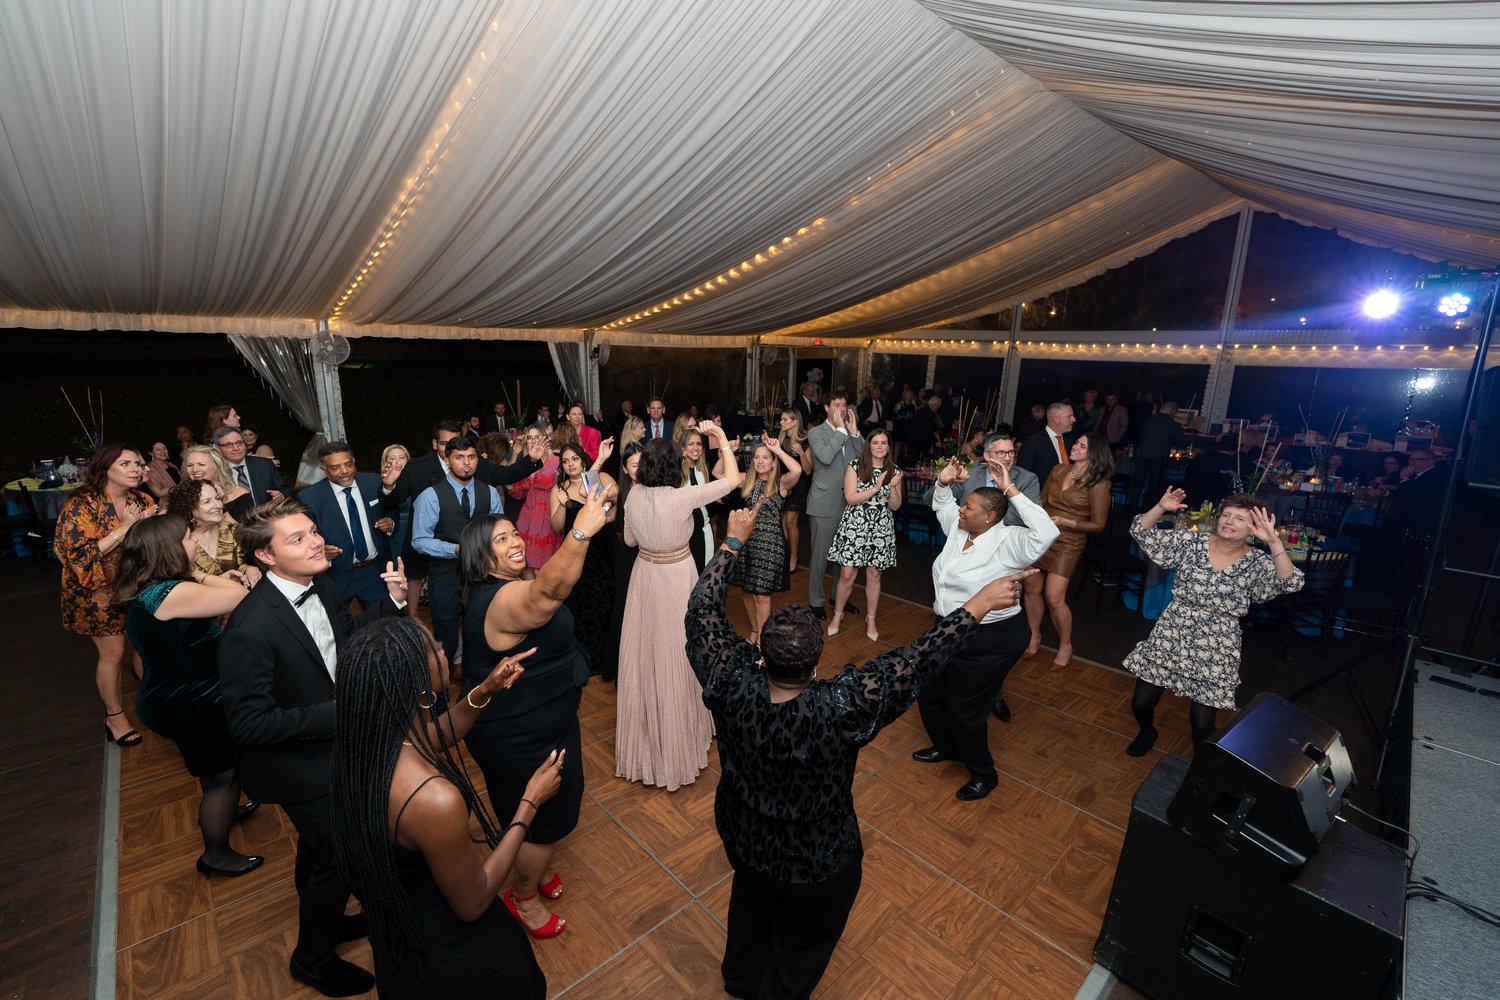 Celebration included an enthusiastic evening of dancing with entertainment by the Uptown Band.